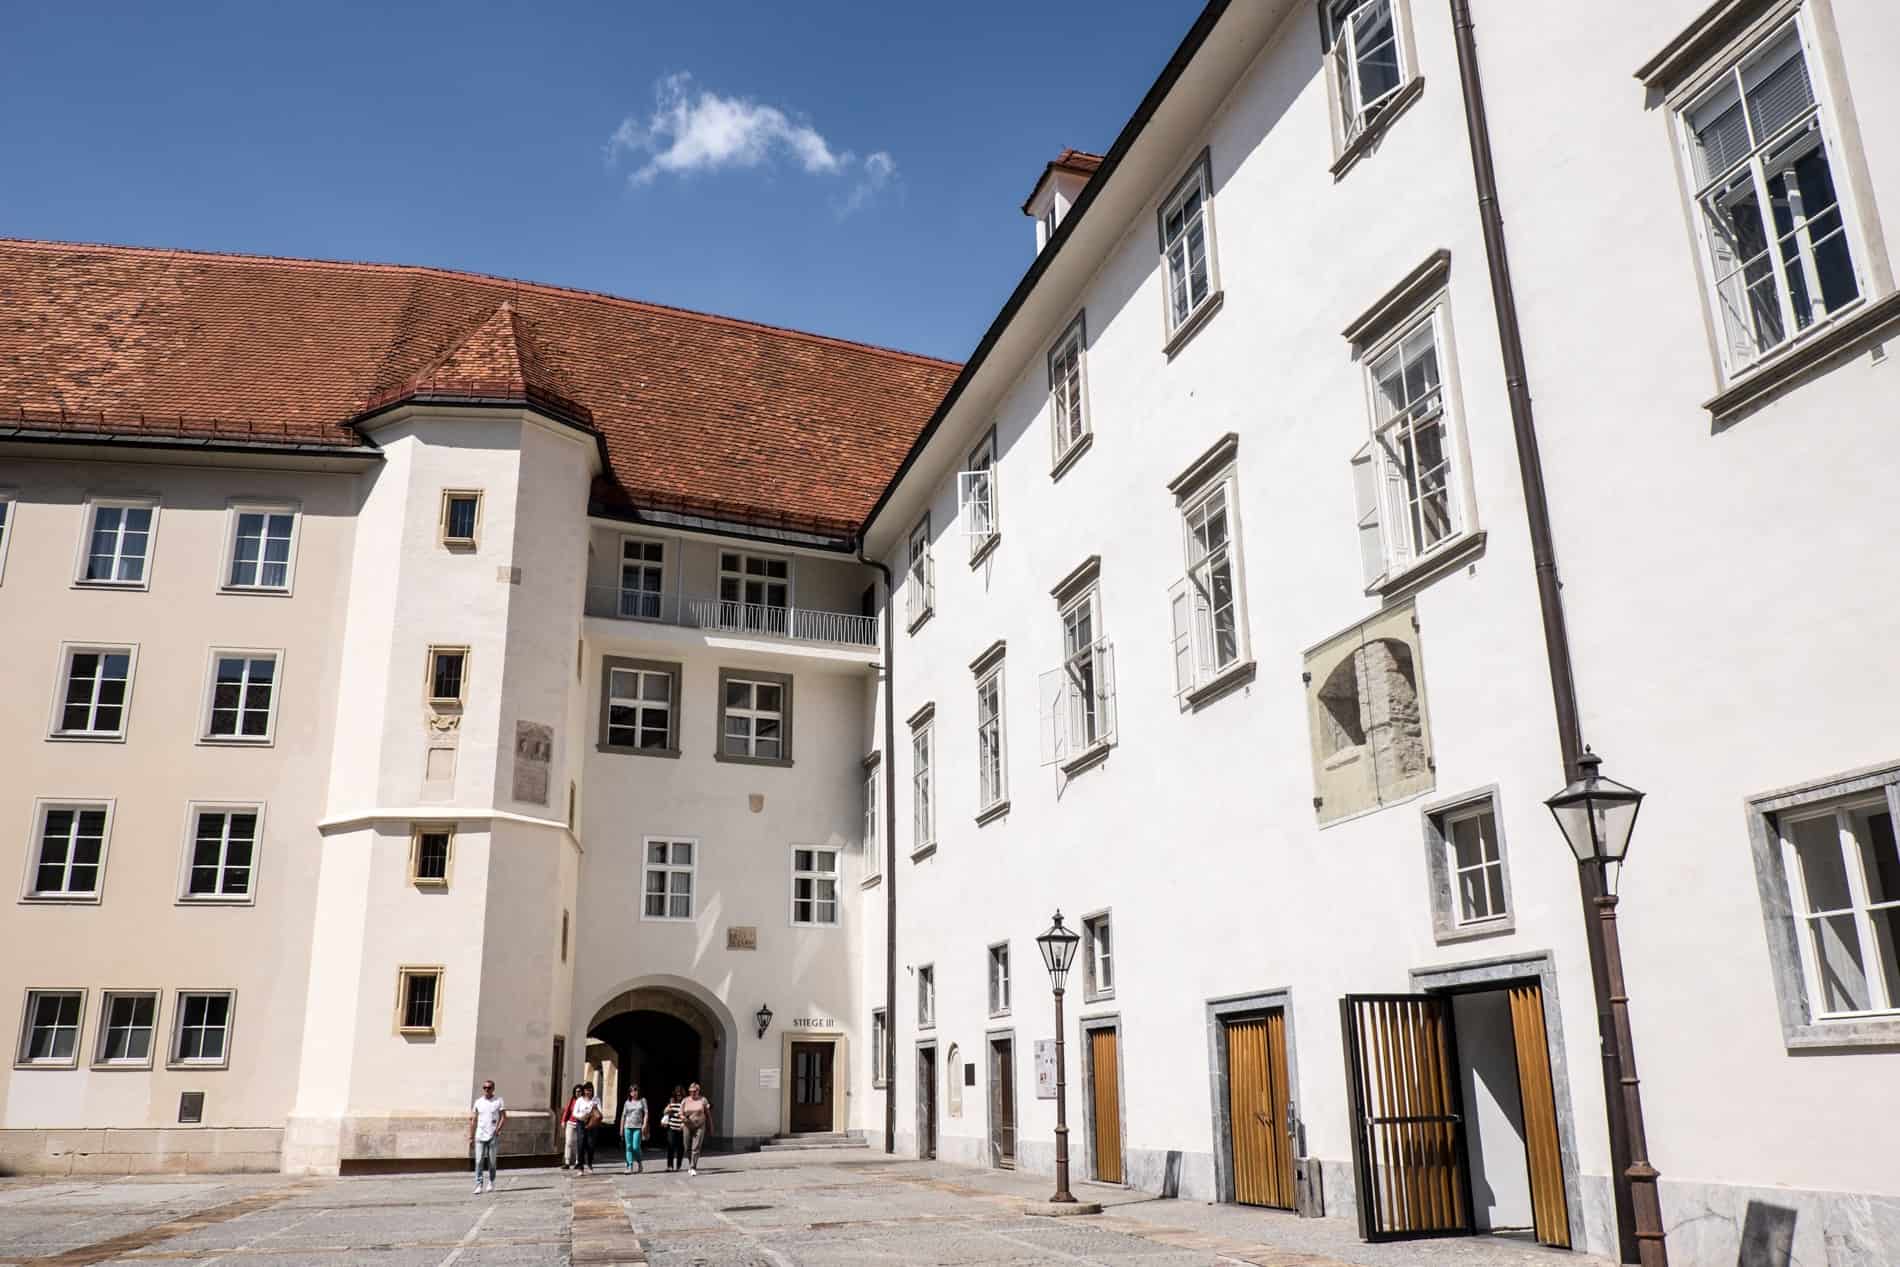 The white facade, turret columned, castle like building of the Burg building in Graz. 